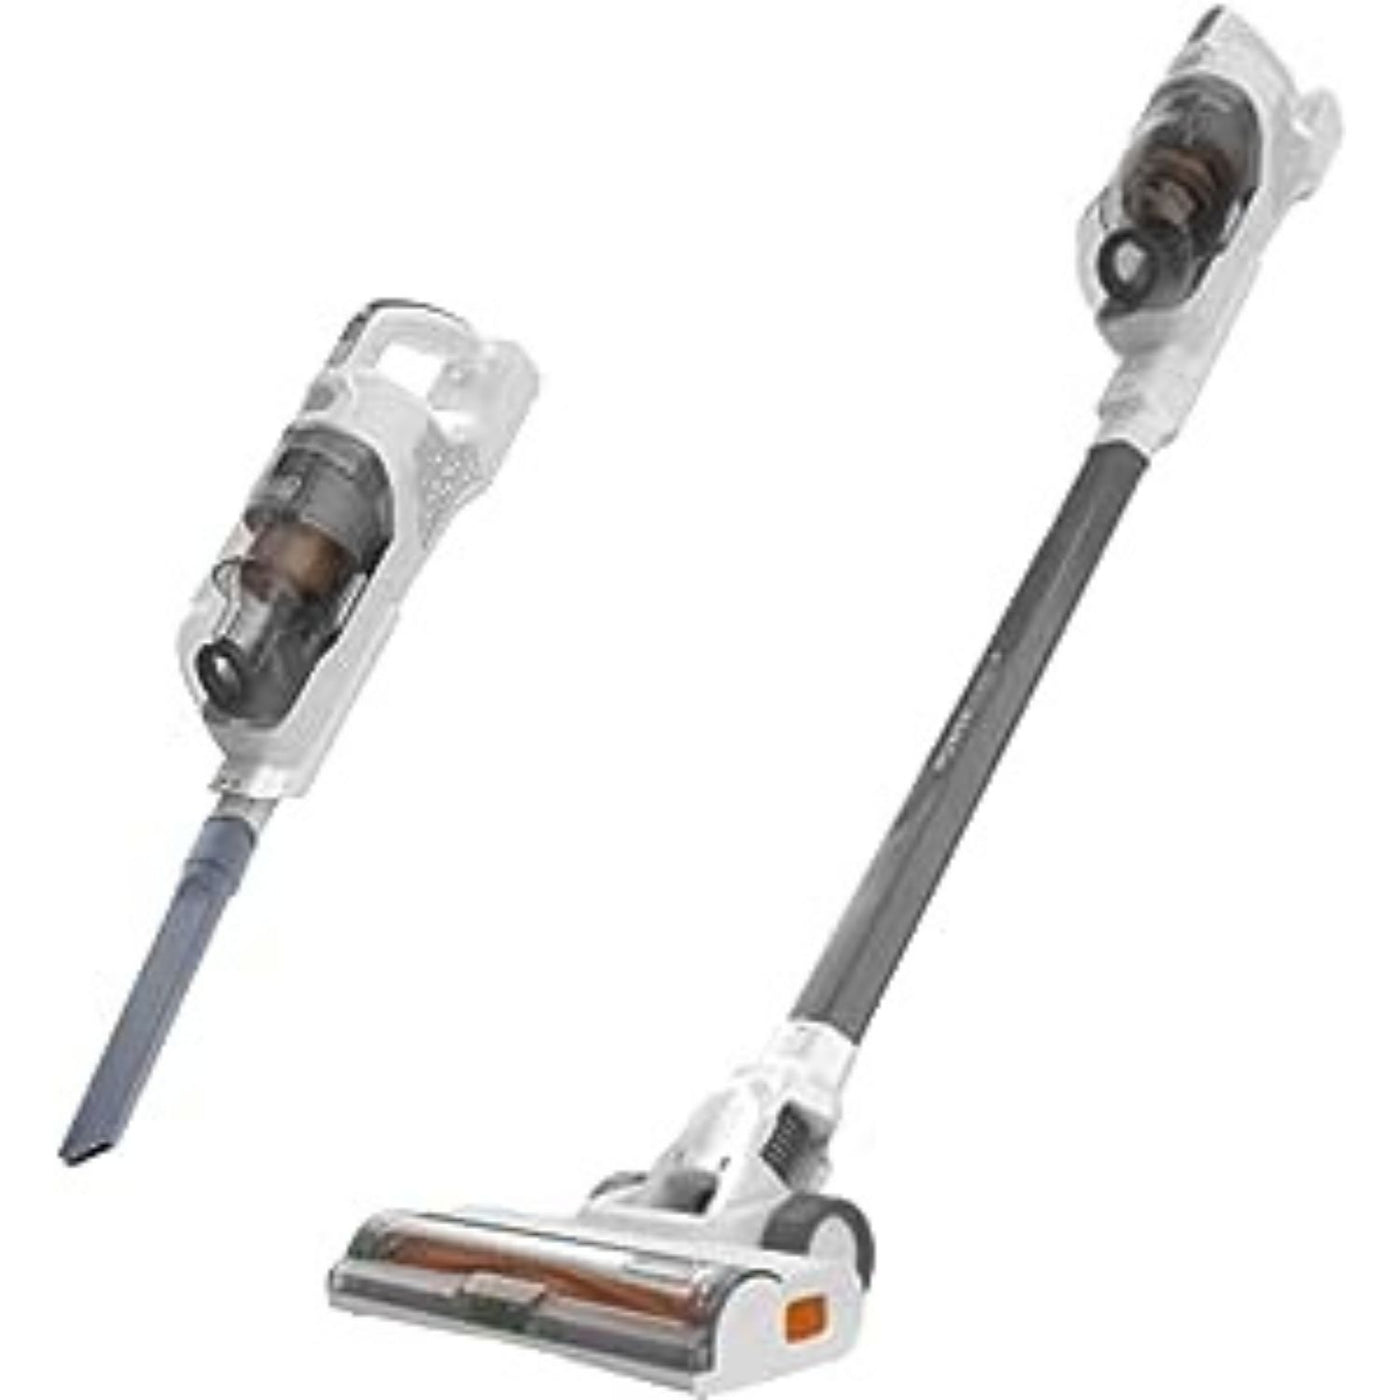 Powerseries+ Cordless Stick Vacuum Cleaner, 18V 1.5Ah Battery, 33 Minutes Runtime, 2 Speed, Beater Bar